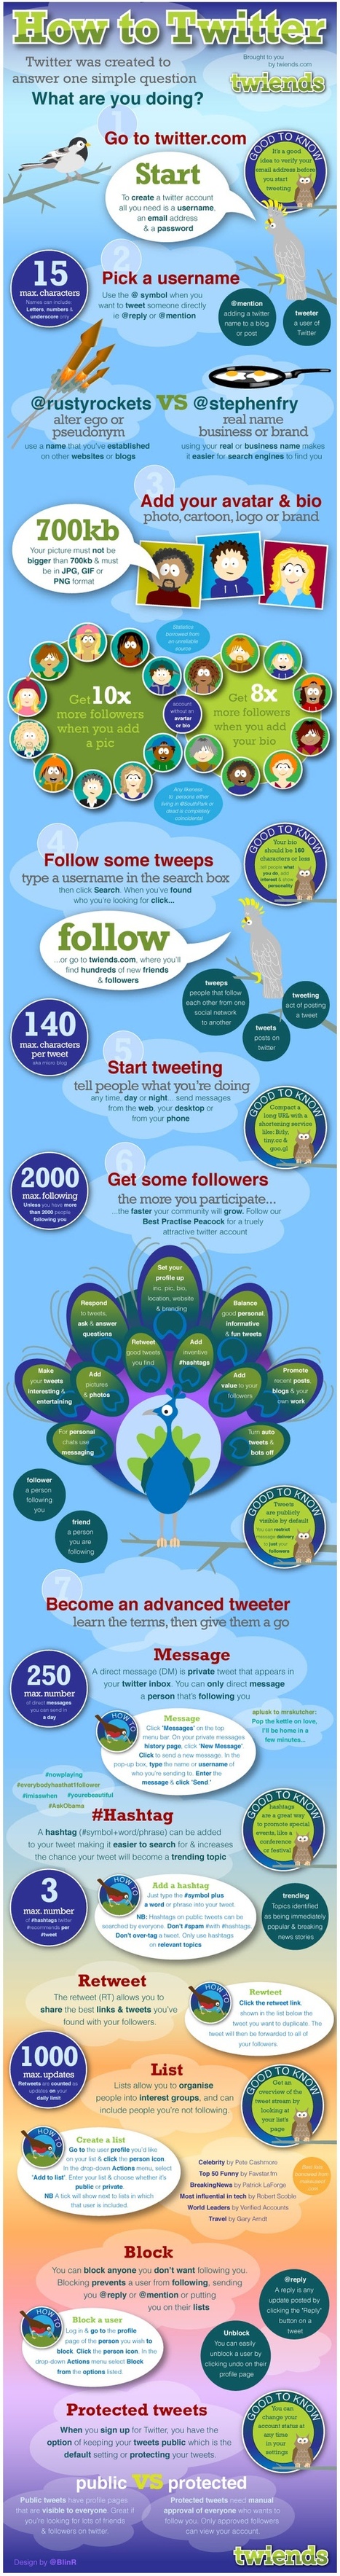 How to Twitter: the infographic | information analyst | Scoop.it